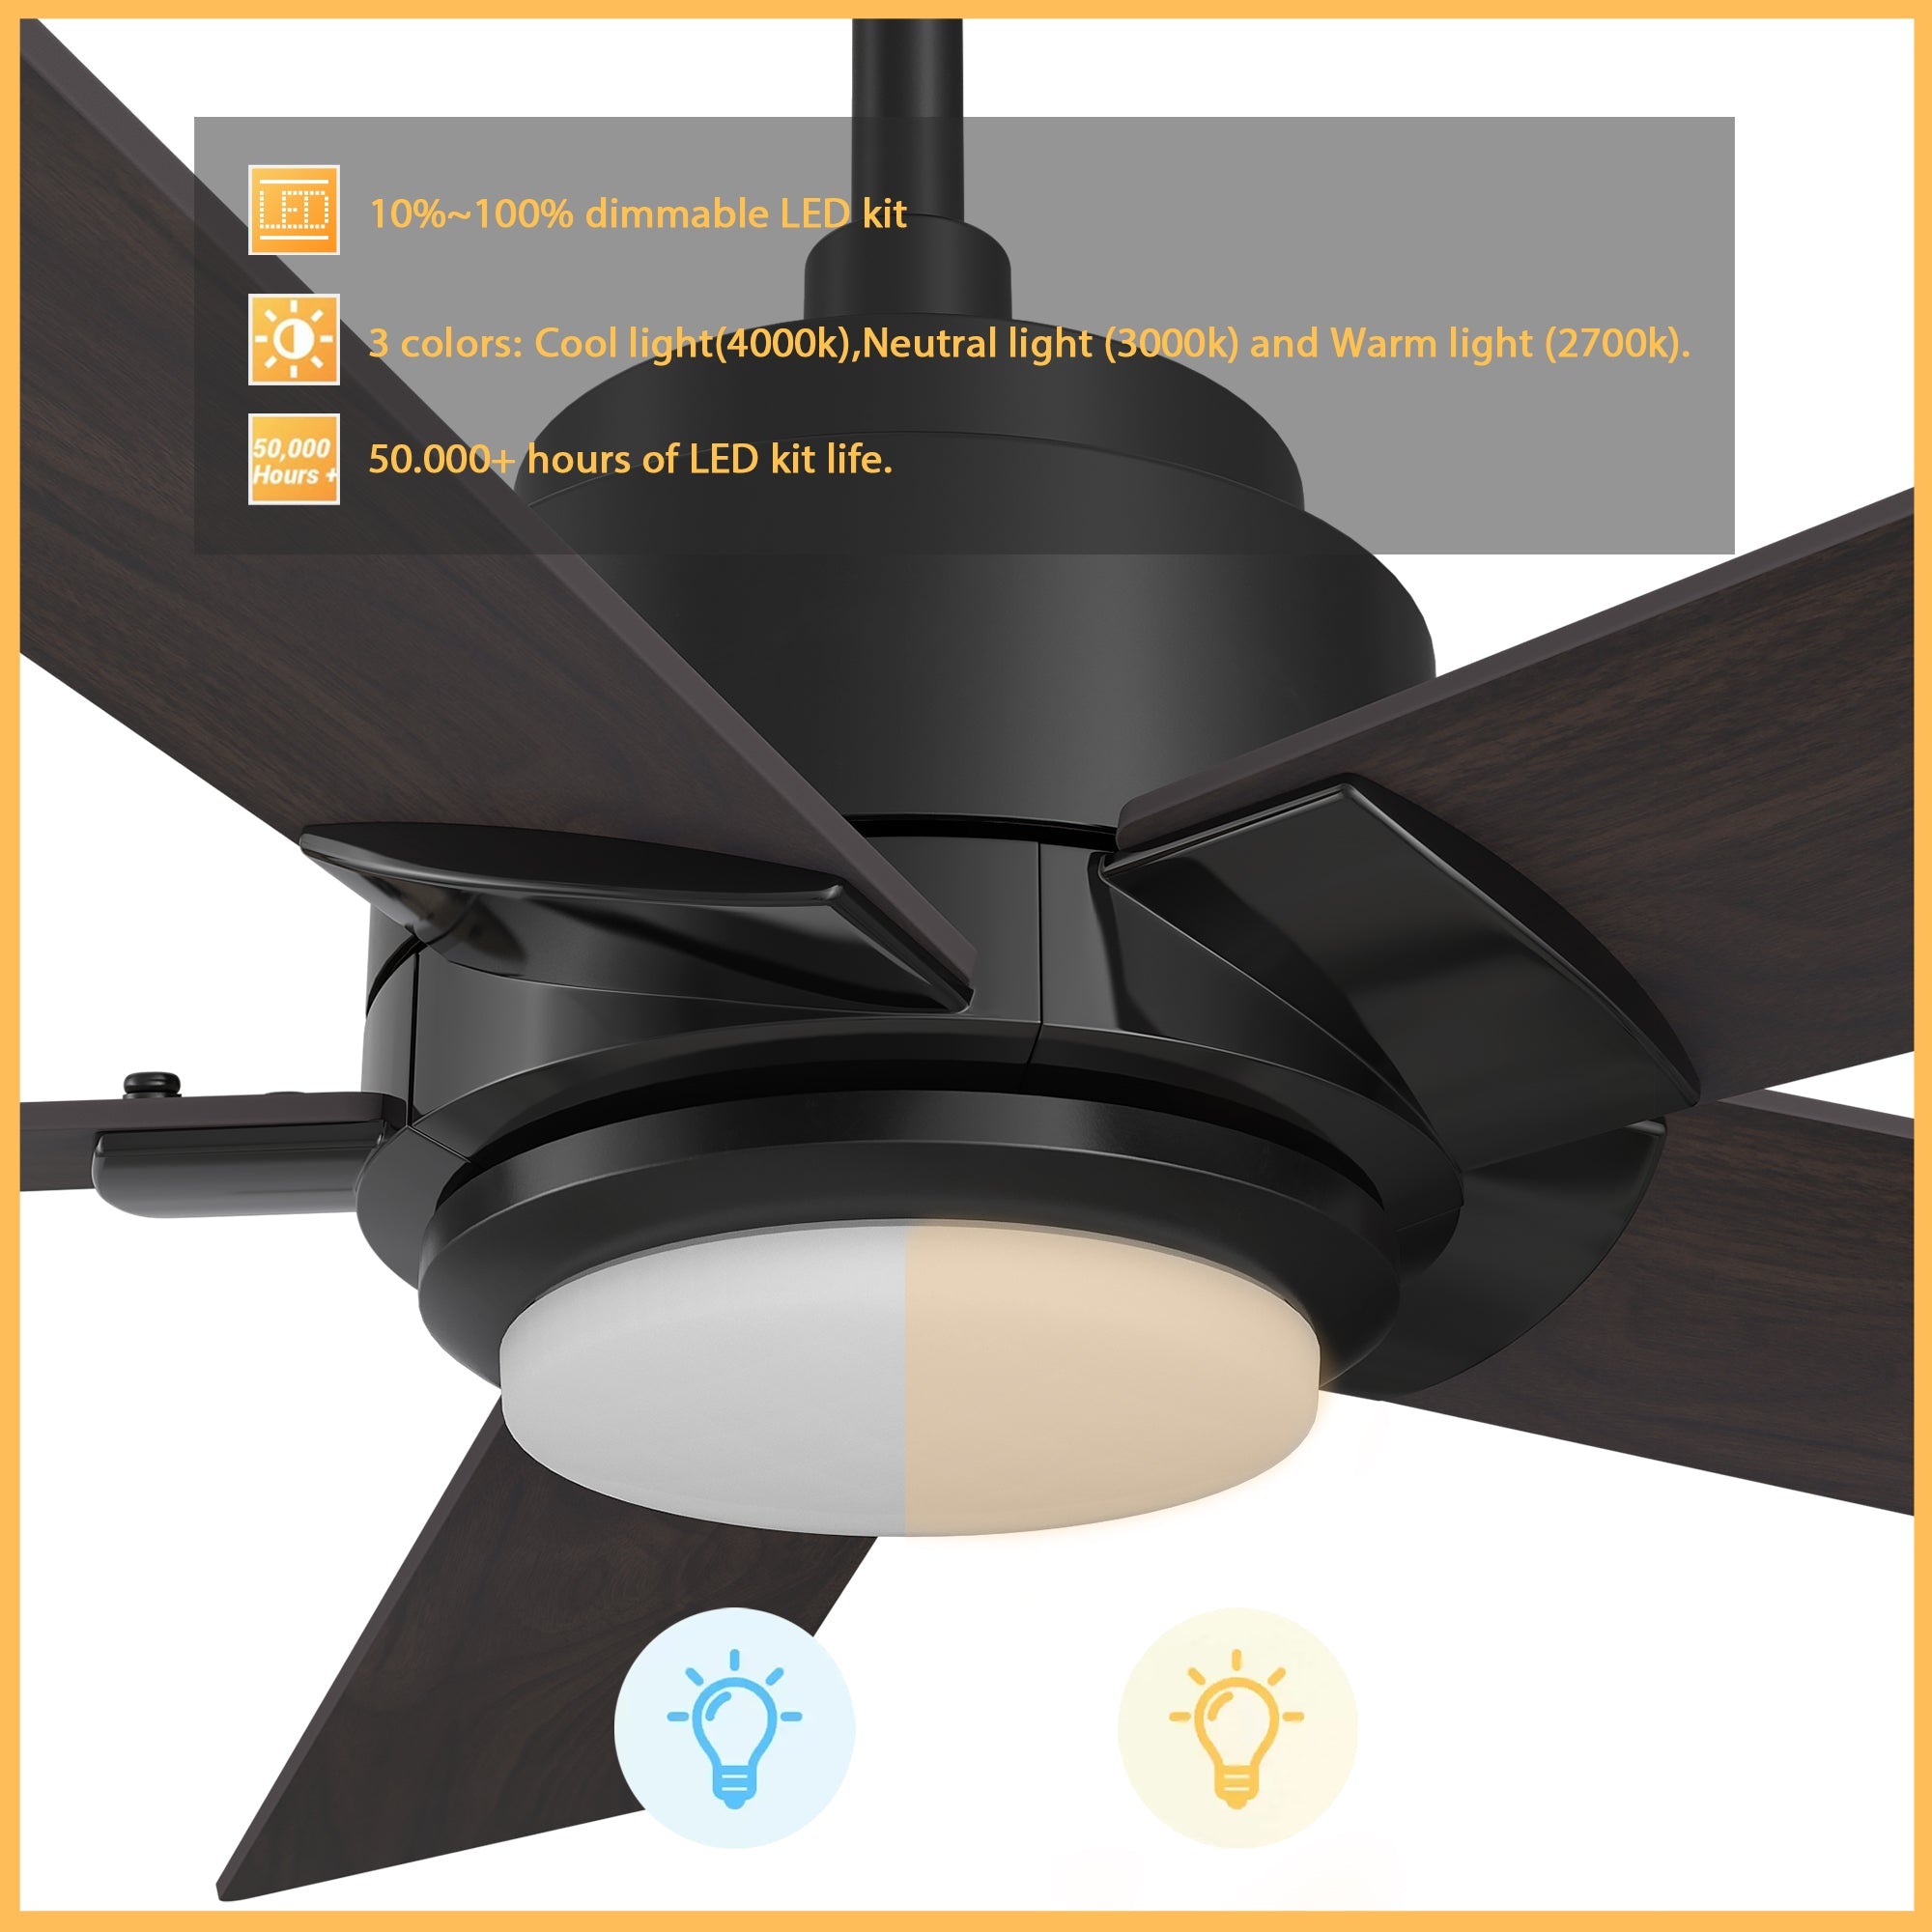 This Aspen 56'' smart ceiling fan keeps your space cool, bright, and stylish. It is a soft modern masterpiece perfect for your large indoor living spaces. This Wifi smart ceiling fan is a simplicity designing with Black finish, use elegant Plywood blades and has an integrated 3998K LED daylight. The fan features Remote control, Wi-Fi apps, Siri Shortcut and Voice control technology (compatible with Amazon Alexa and Google Home Assistant ) to set fan preferences. #color_wood